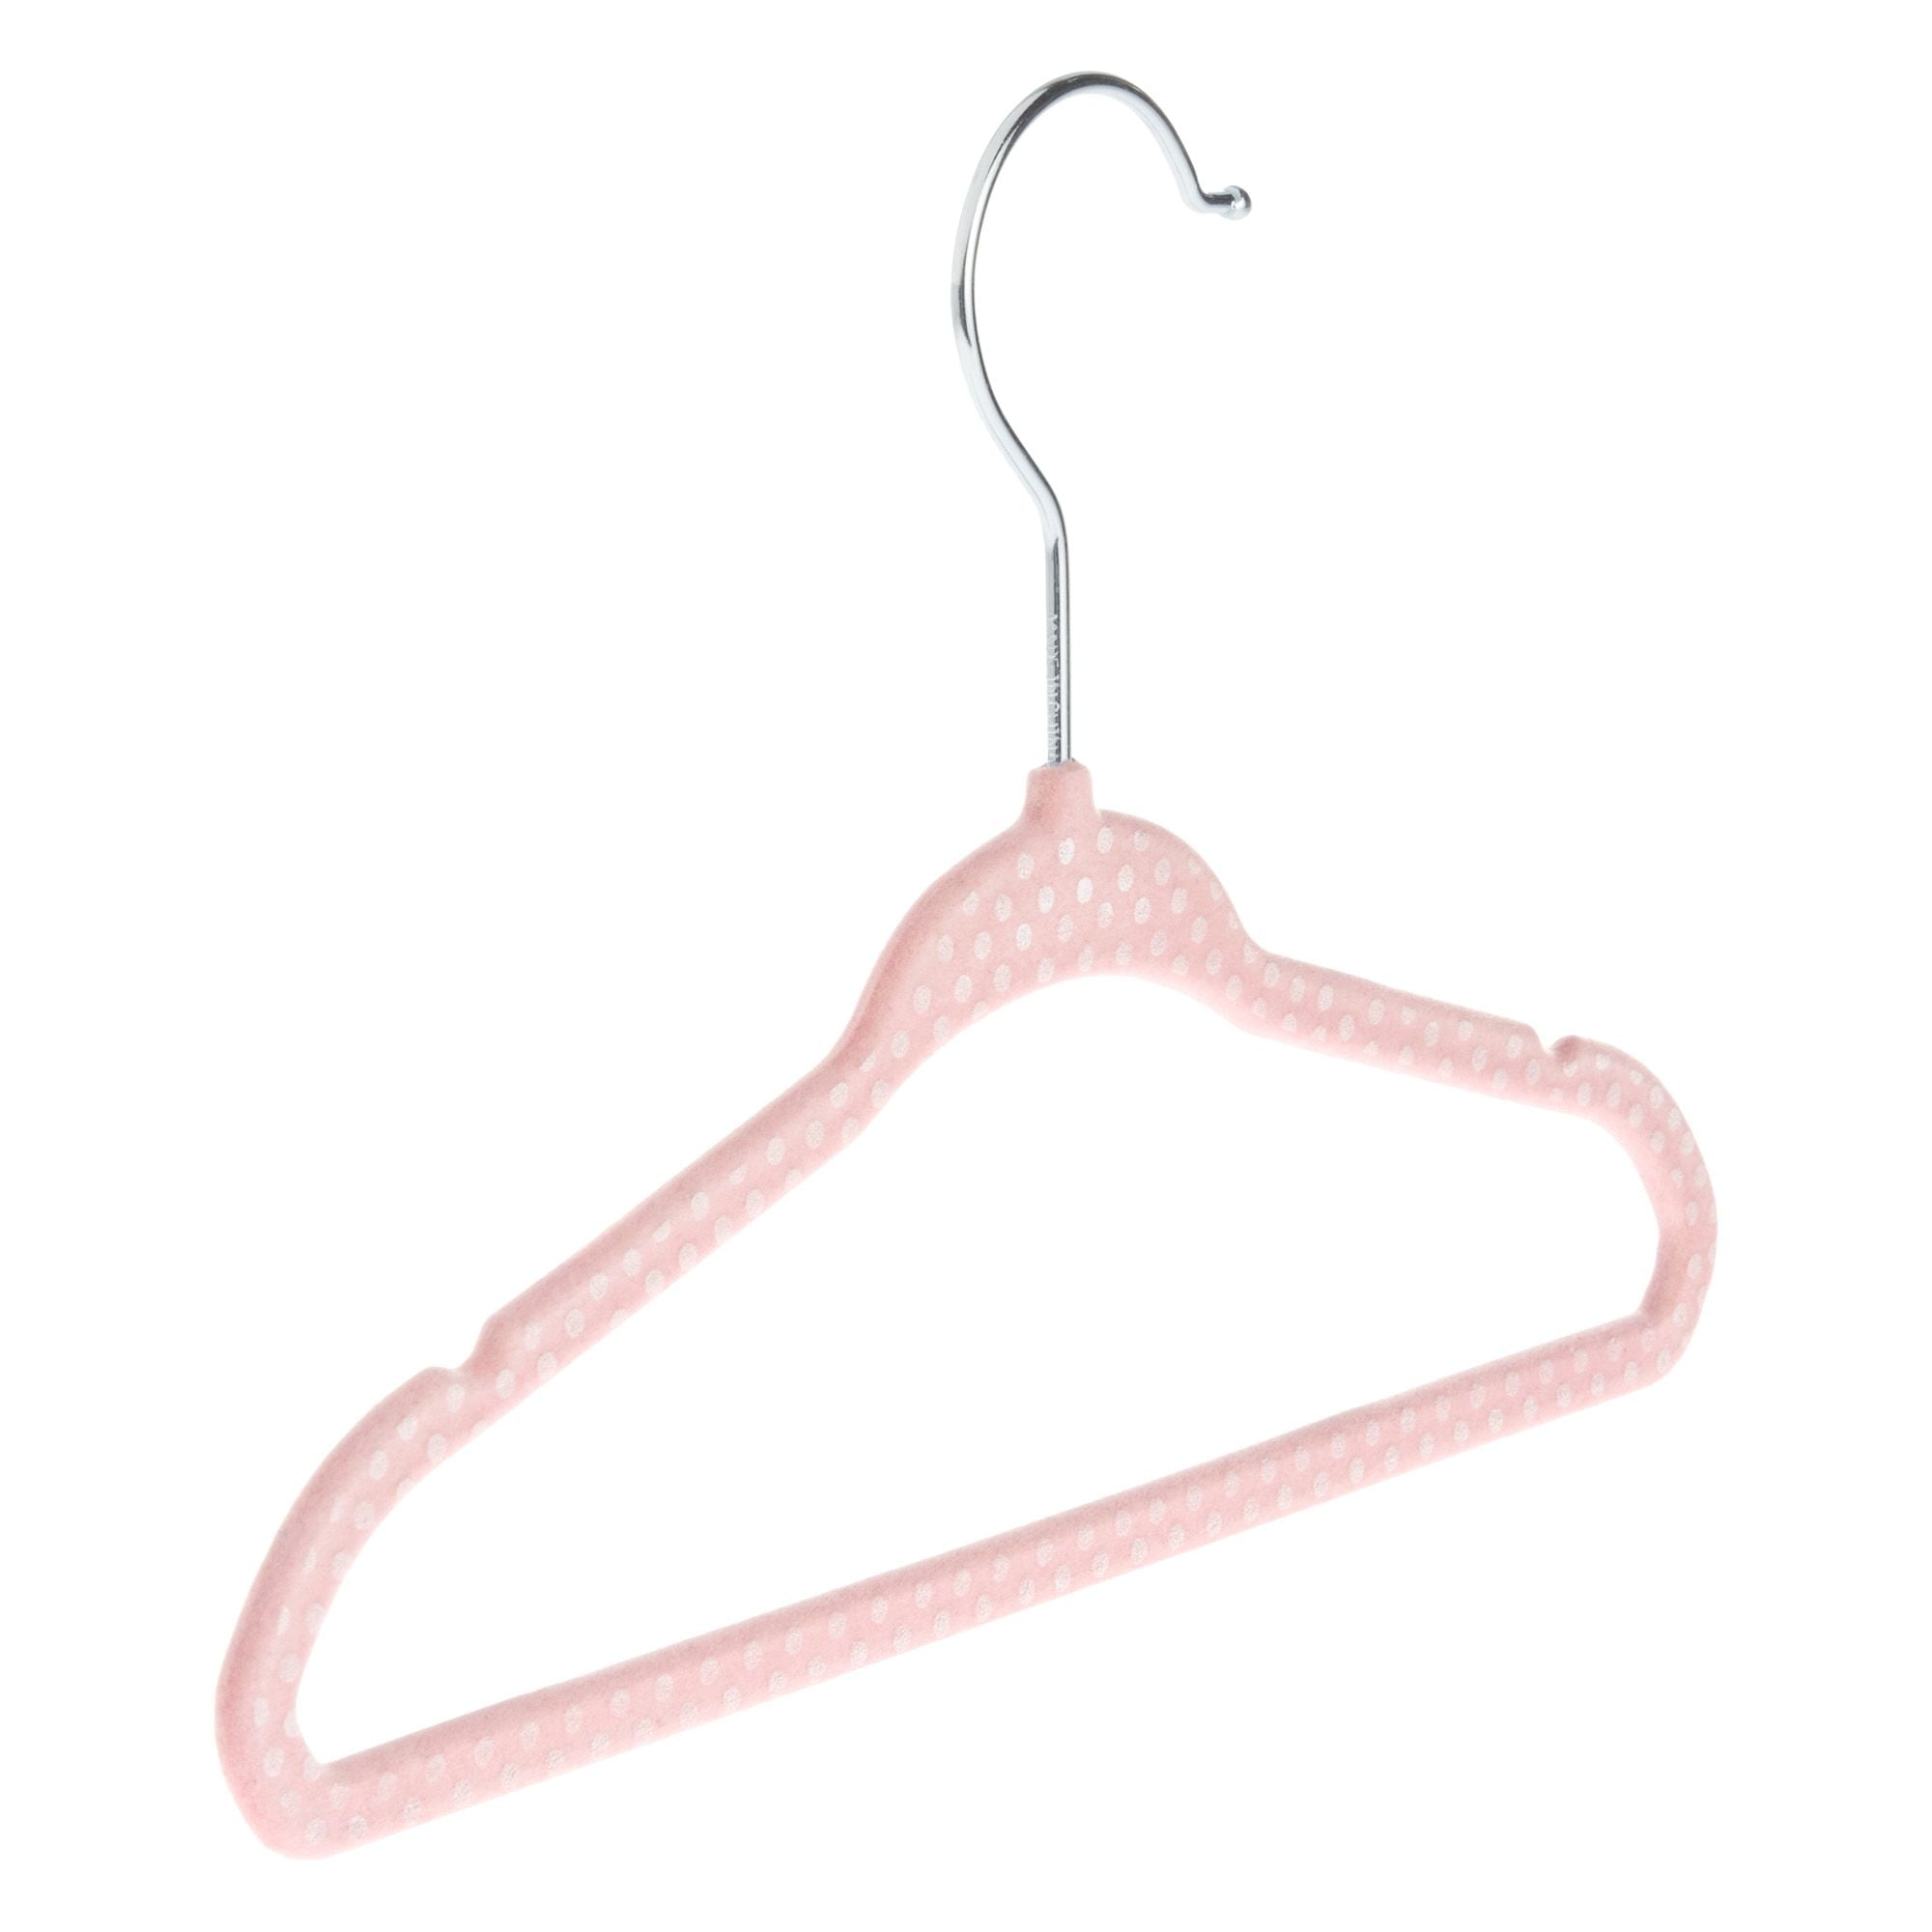  trusir Baby Hangers for Closet 100 Pack Pink Plastic